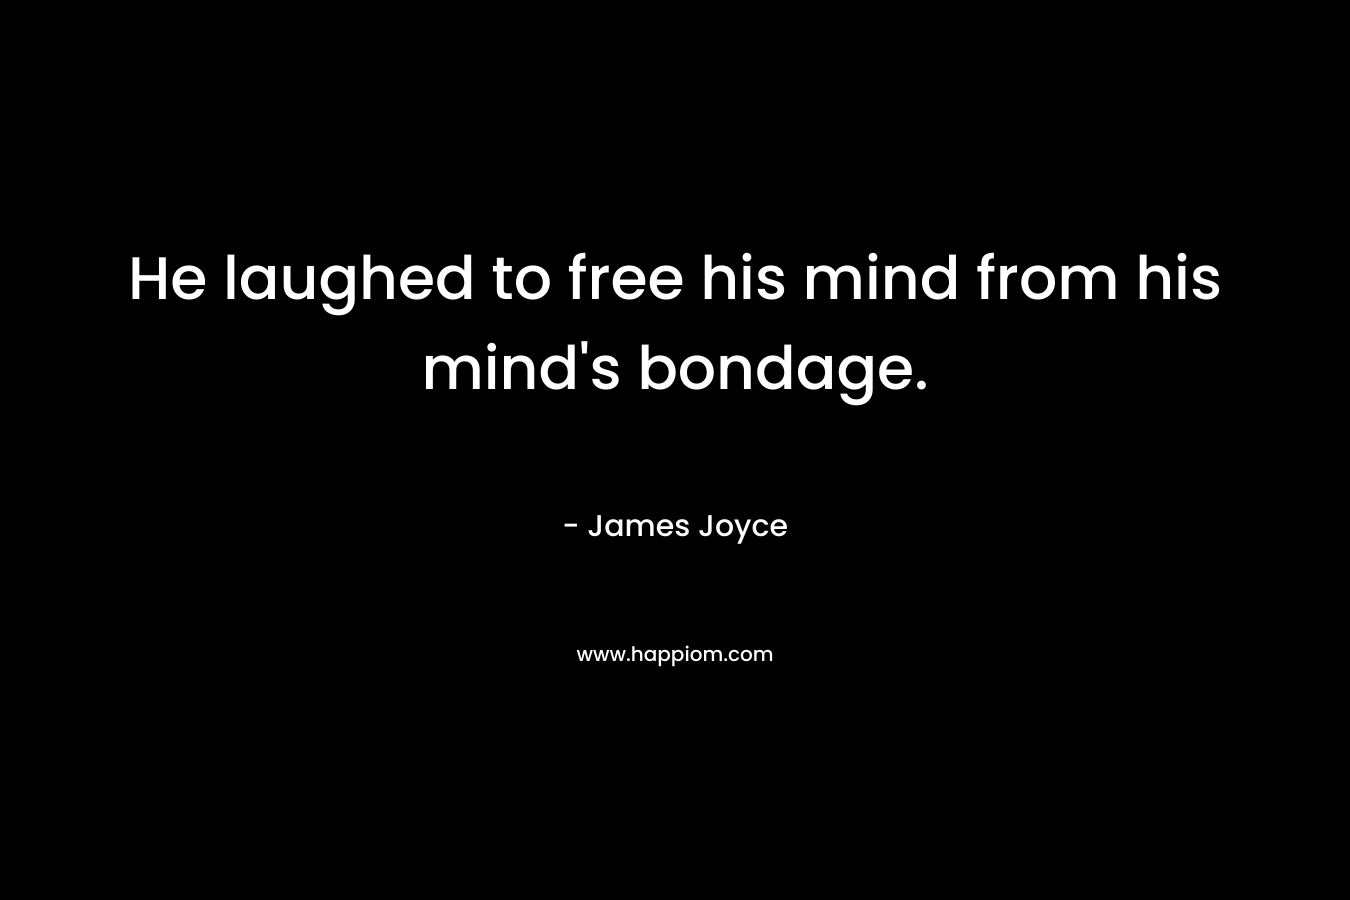 He laughed to free his mind from his mind’s bondage. – James Joyce